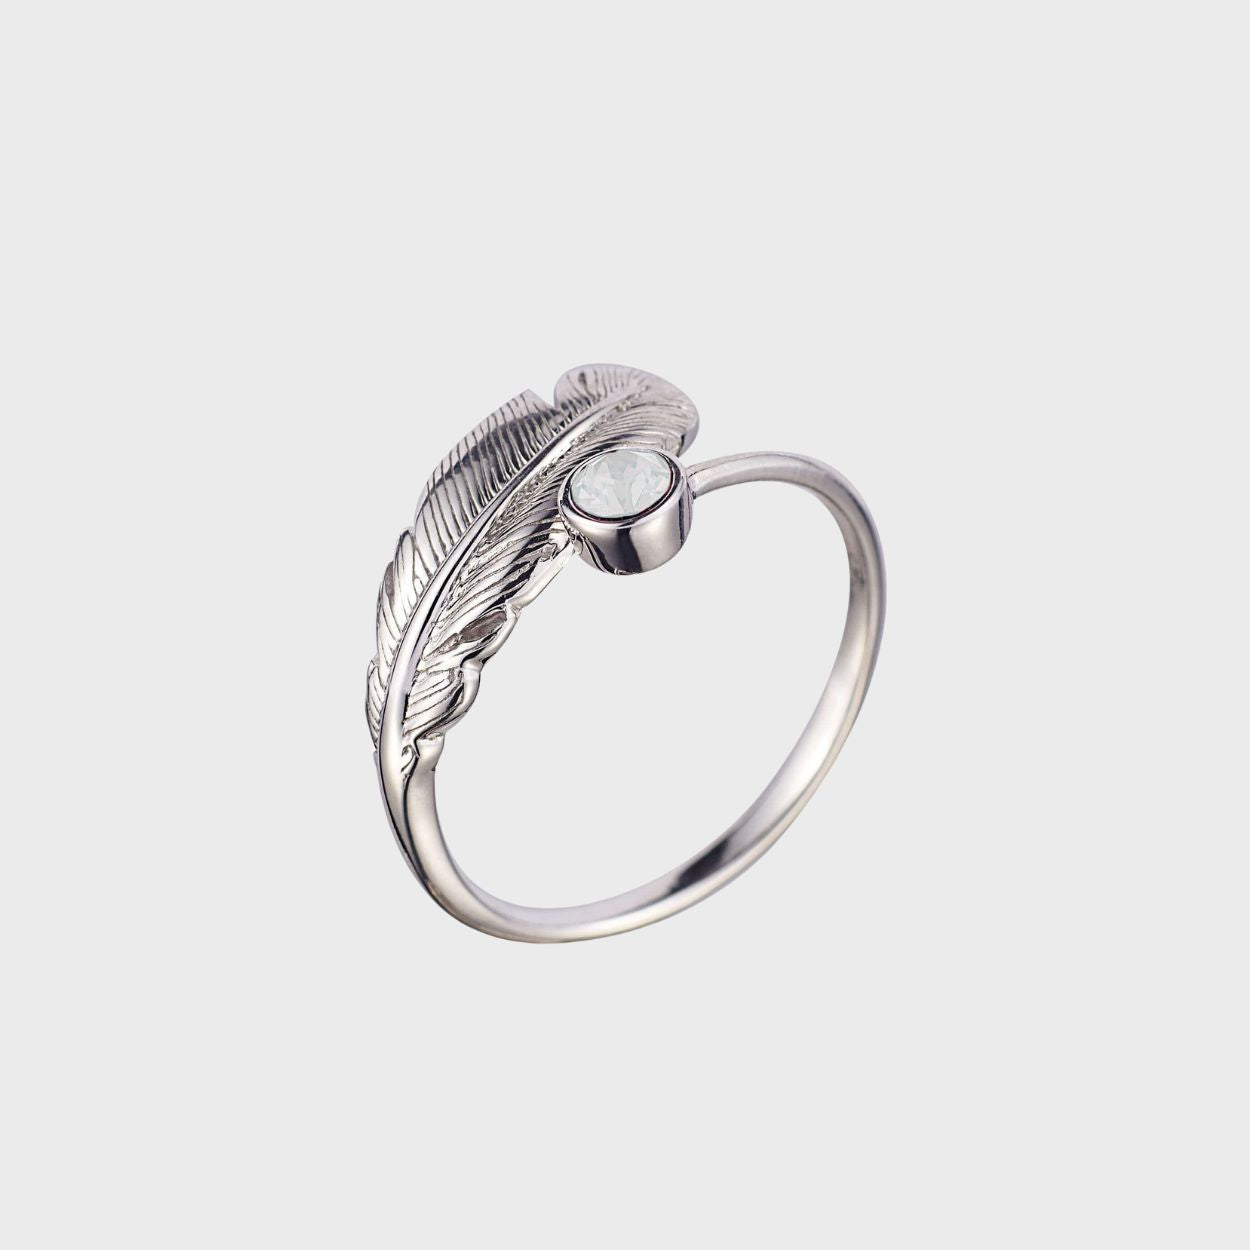 Adjustable Silver & Crystal Feather Birthstone Ring - October